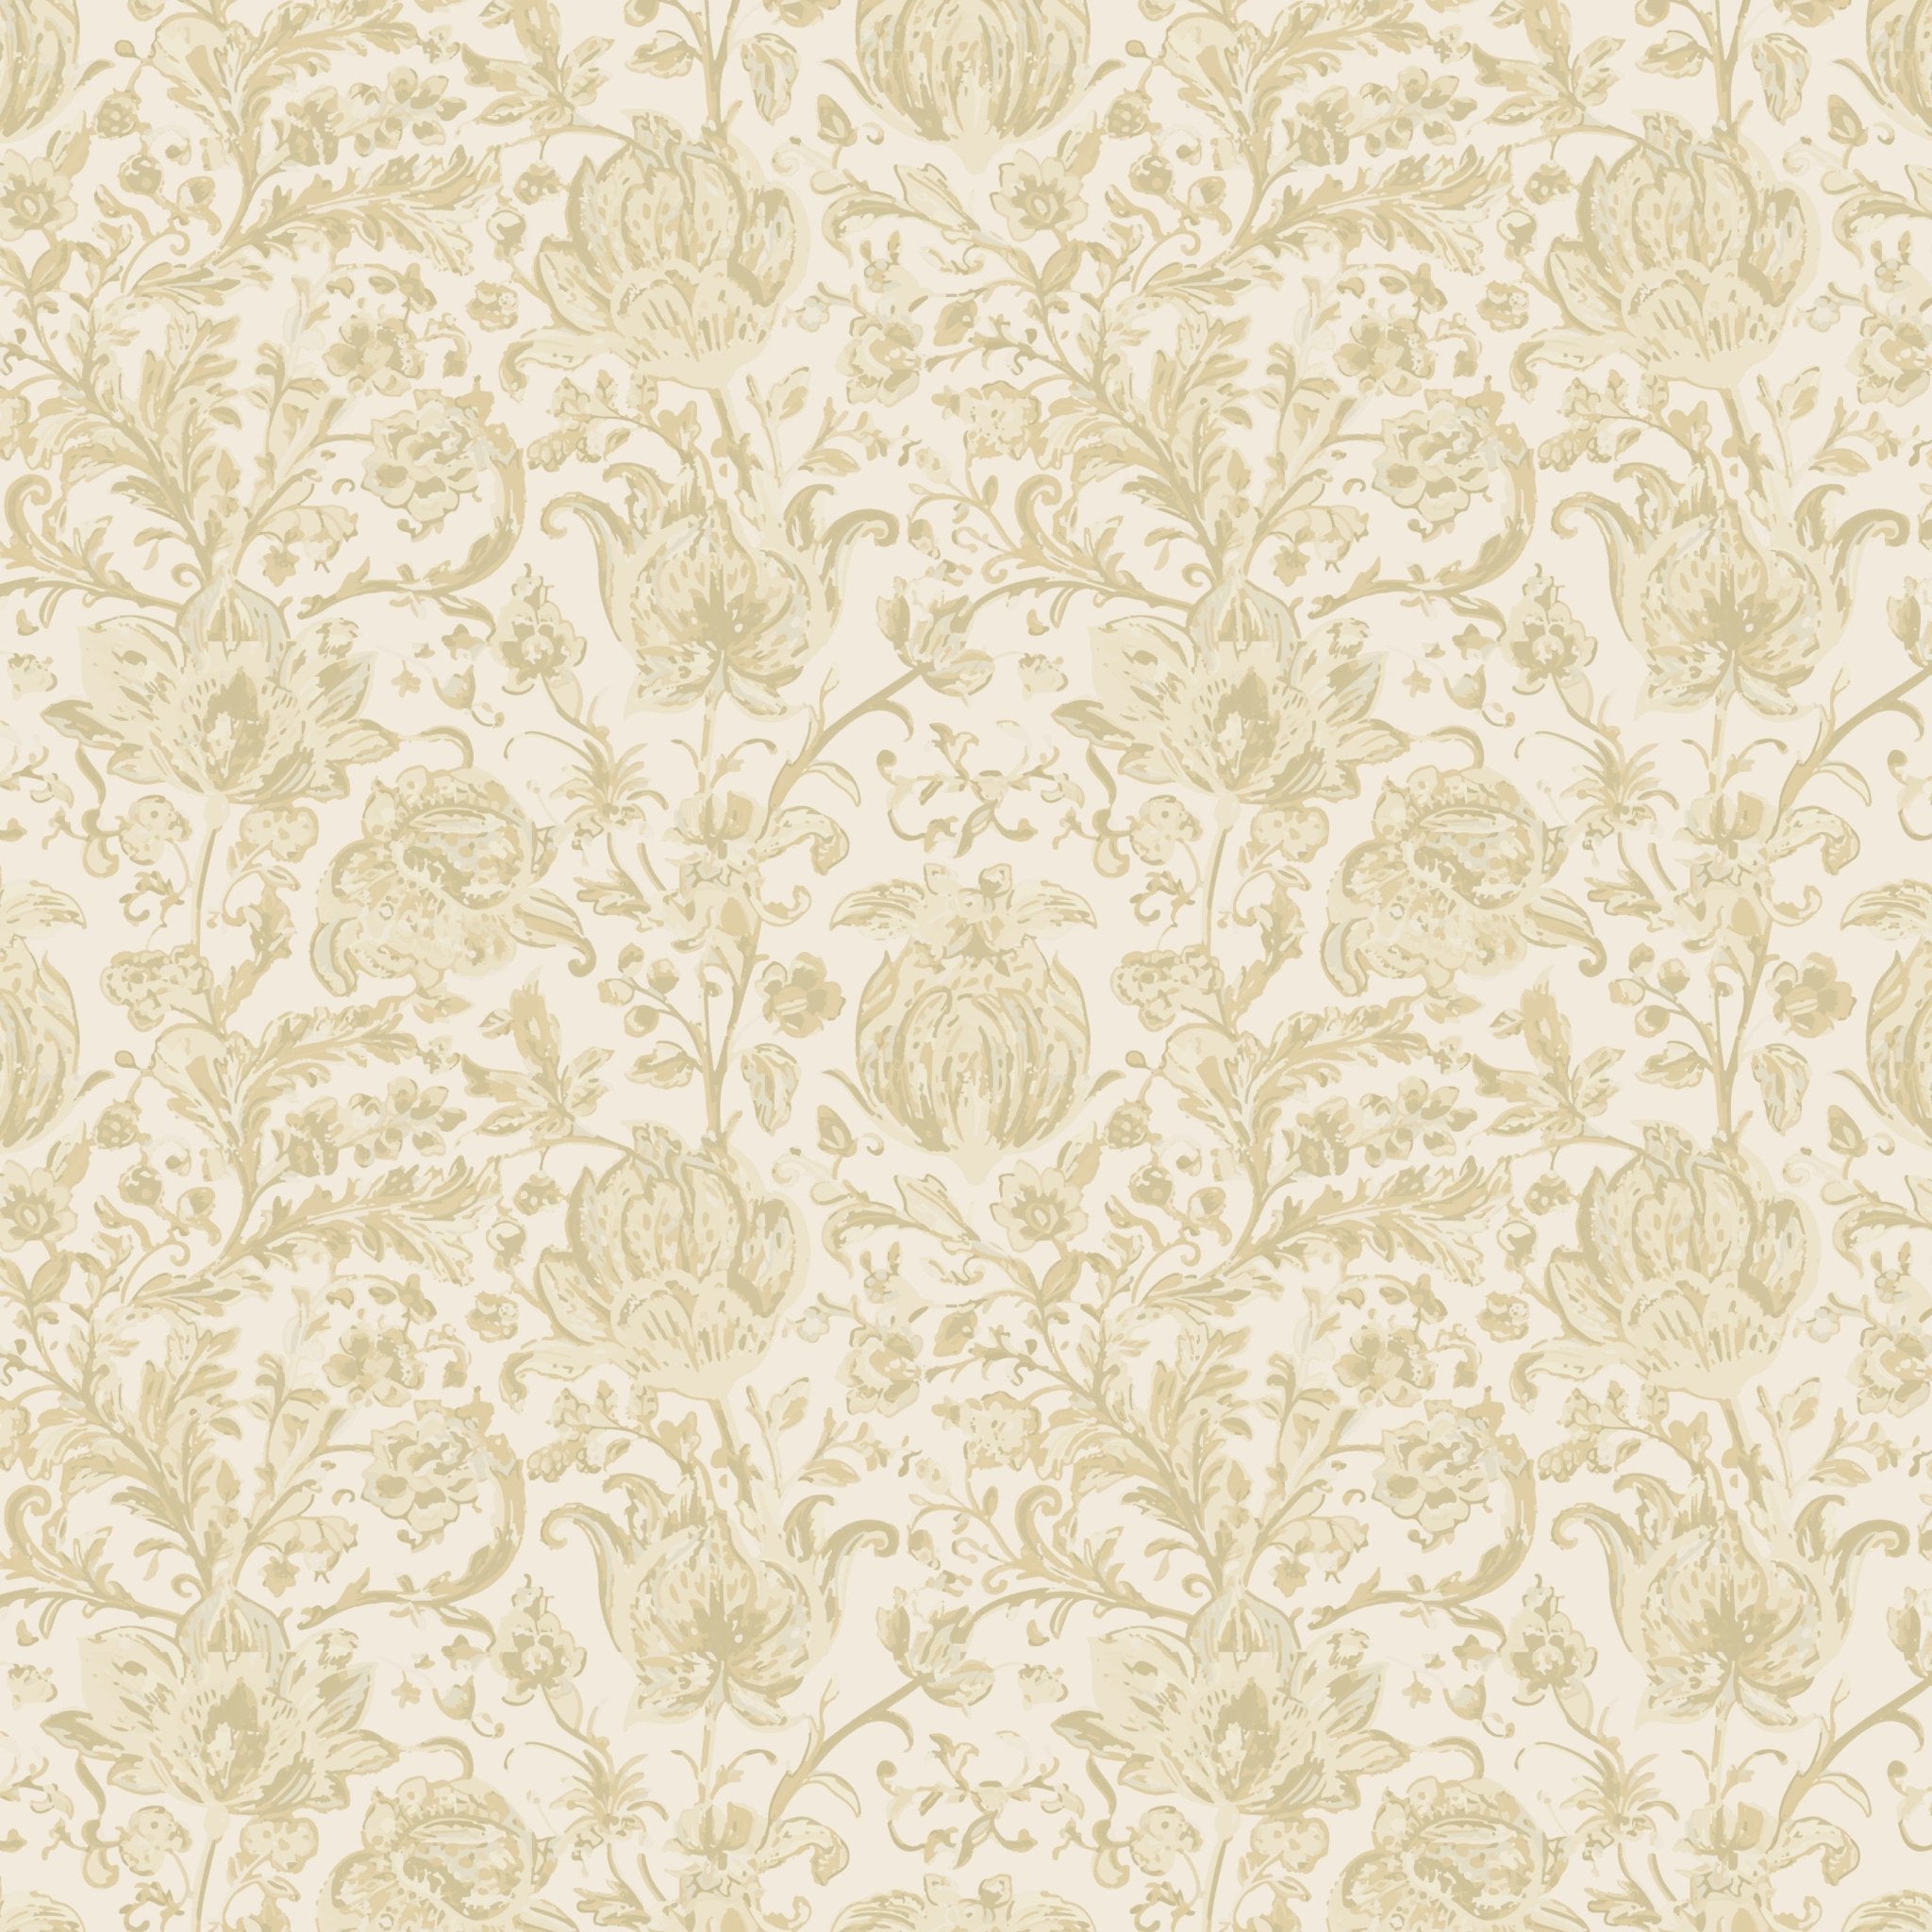 Elaborate beige floral brocade pattern wallpaper, with detailed flowers and ornate foliage on a light background, evoking a sense of luxury and classic style.